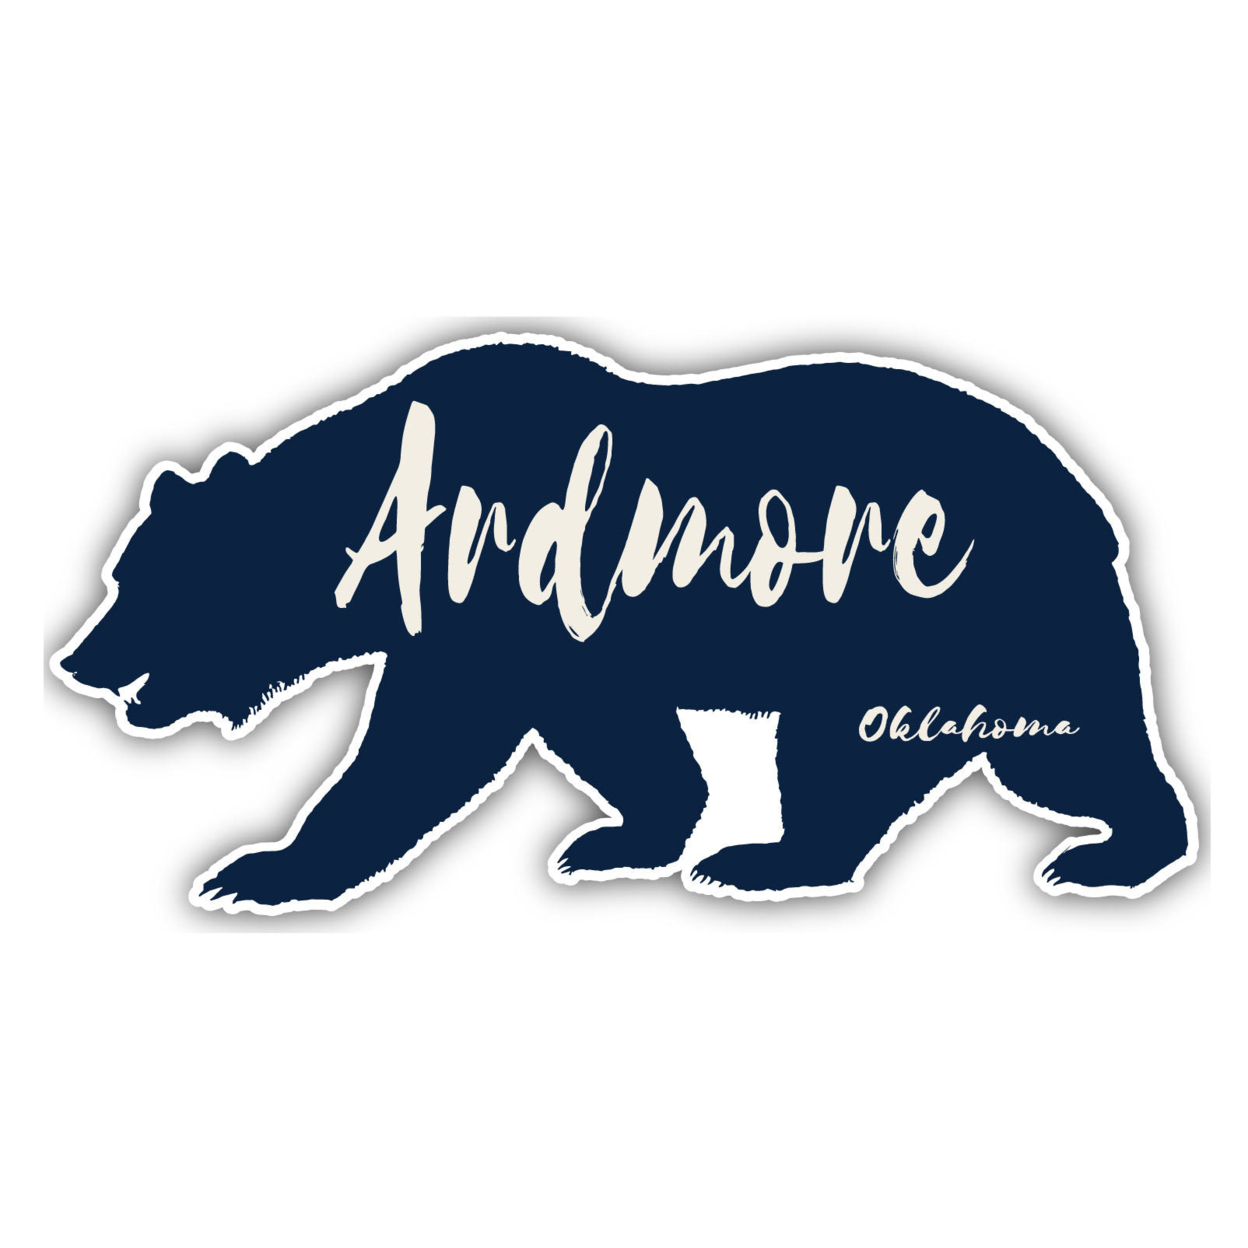 Ardmore Oklahoma Souvenir Decorative Stickers (Choose Theme And Size) - 4-Pack, 12-Inch, Bear